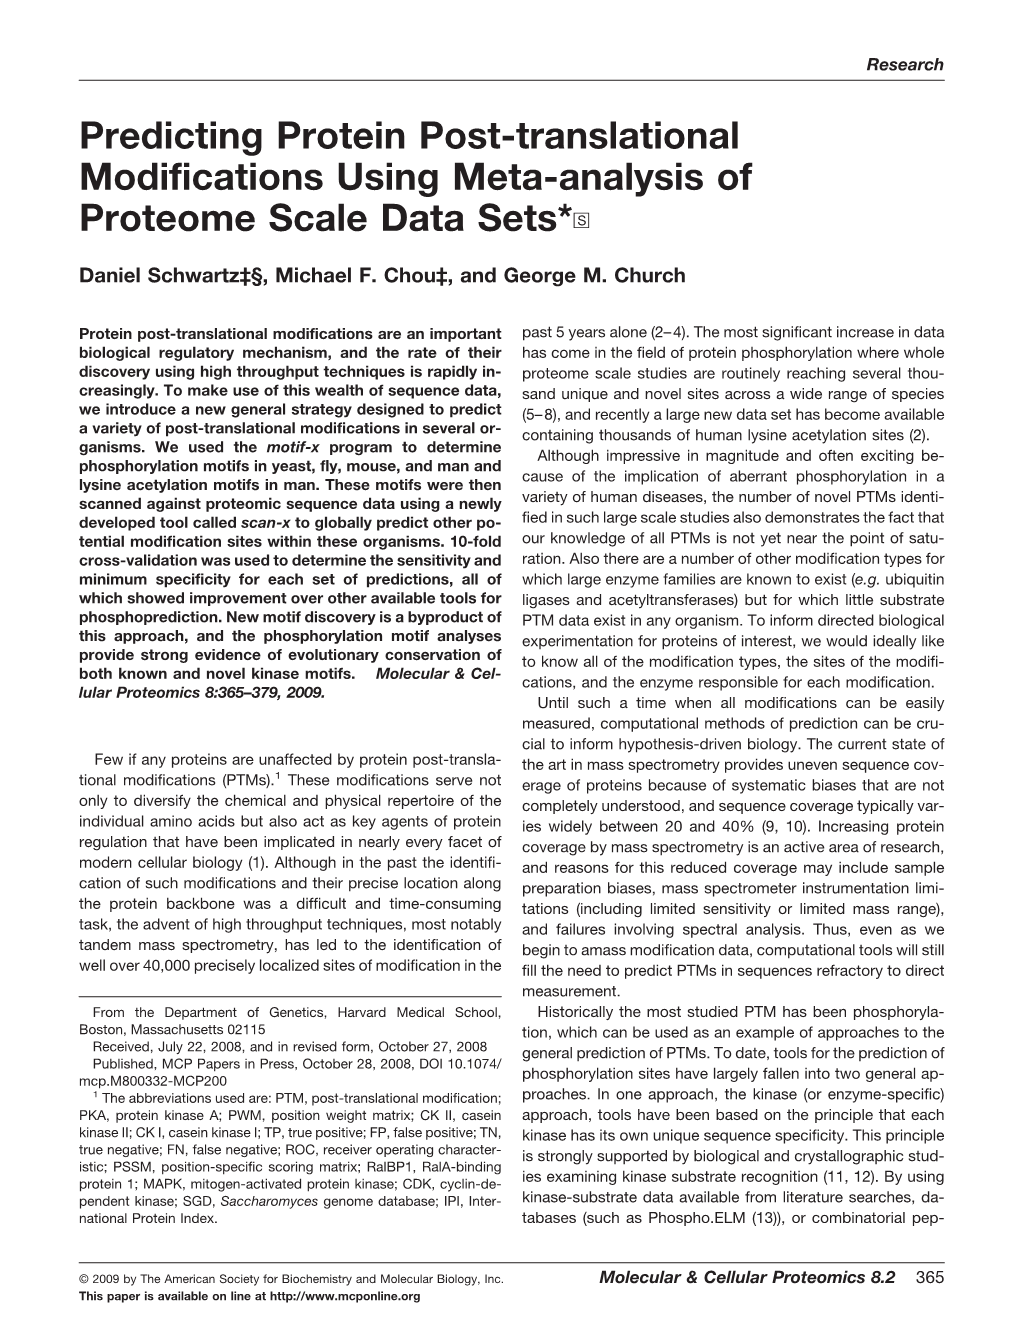 Predicting Protein Post-Translational Modifications Using Meta-Analysis of Proteome Scale Data Sets*□S